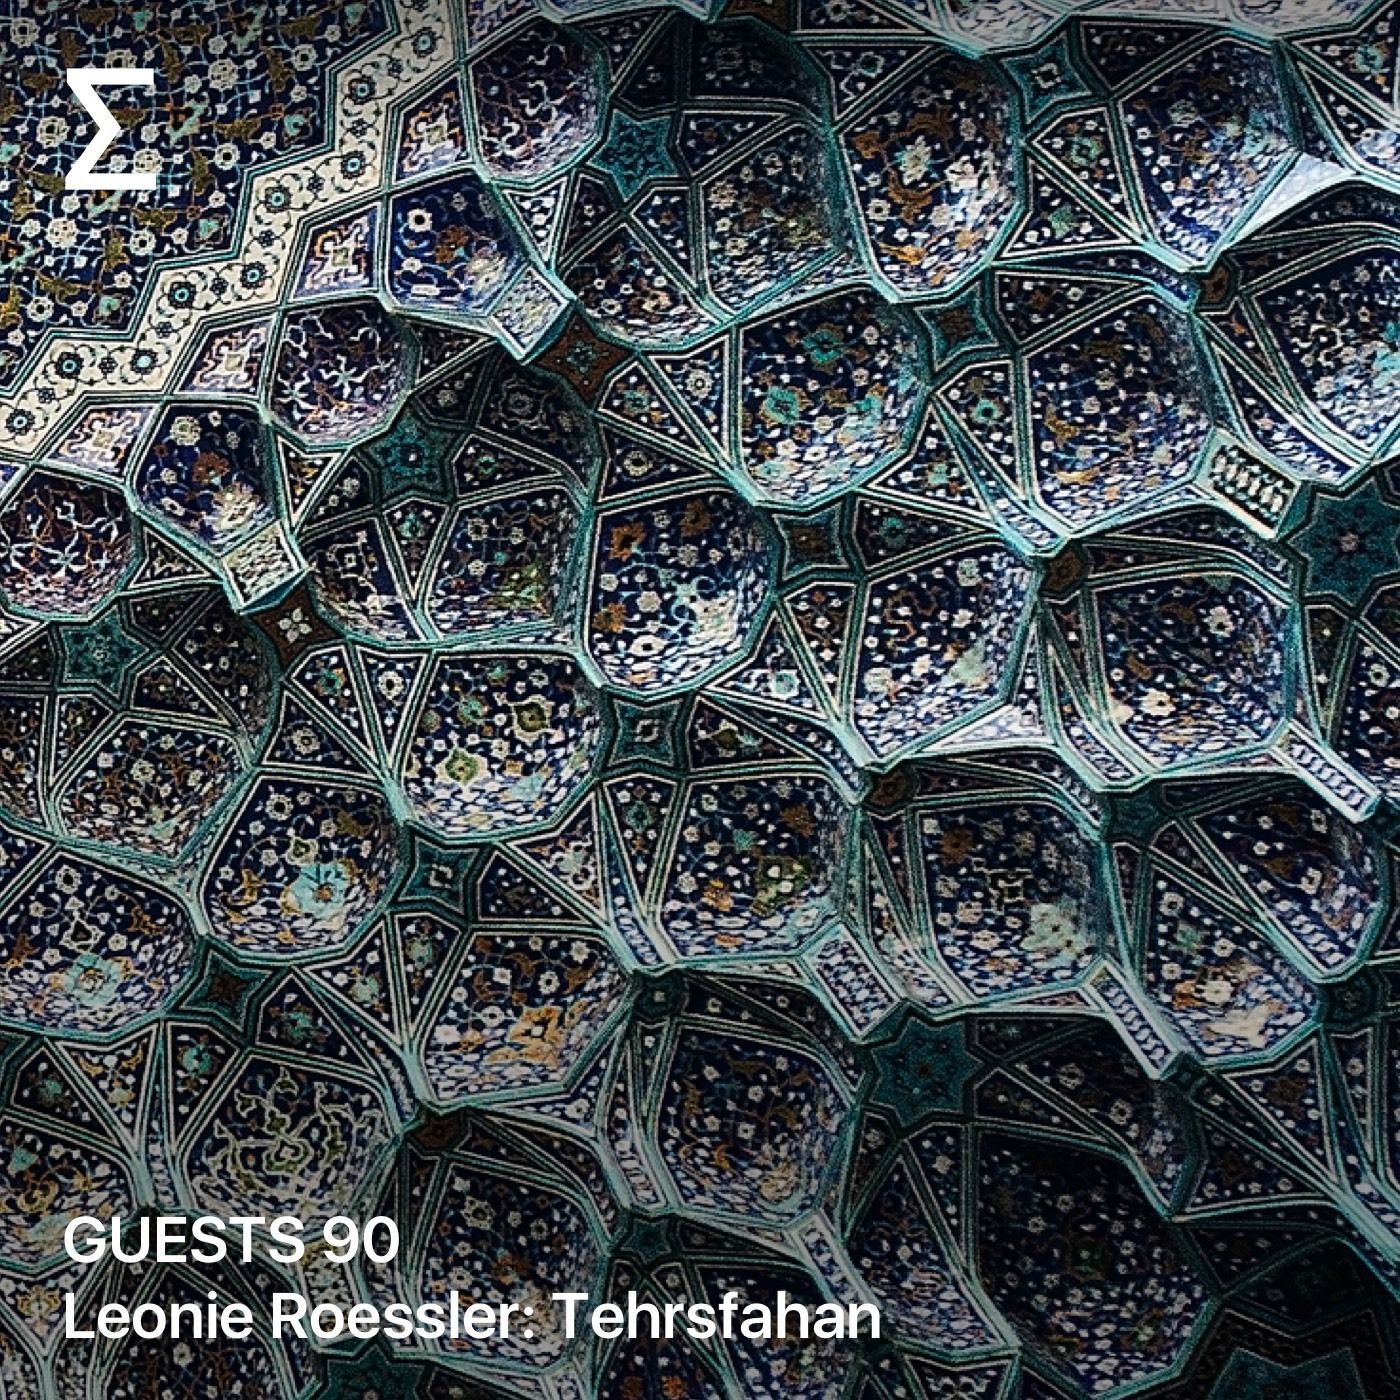 GUESTS 90 – Leonie Roessler: Tehrsfahan